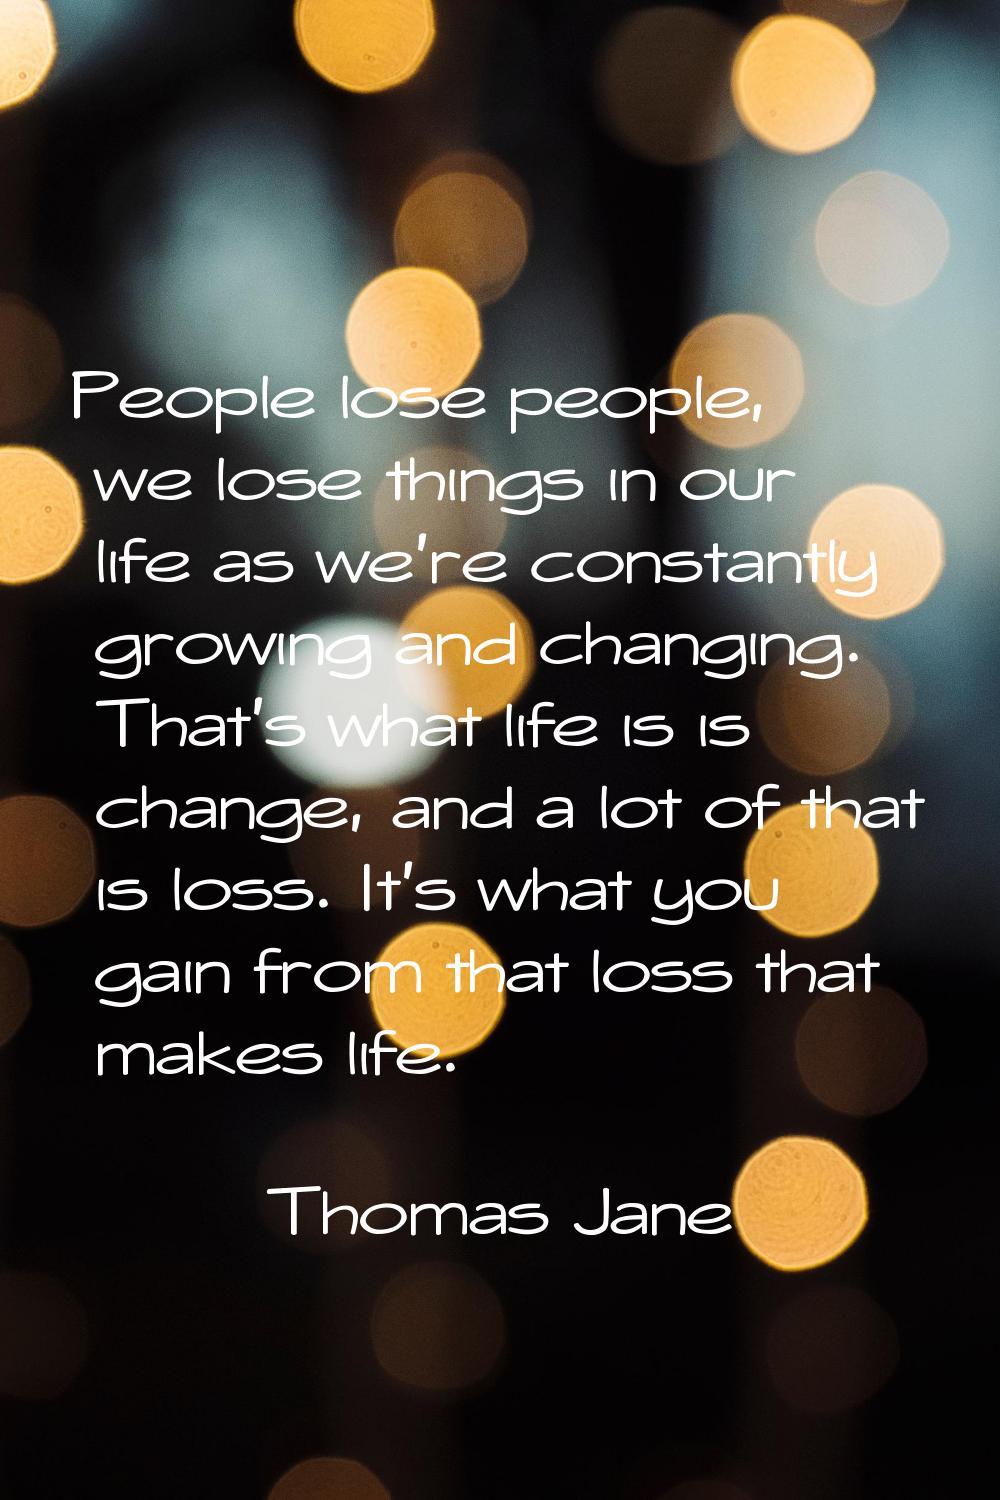 People lose people, we lose things in our life as we're constantly growing and changing. That's wha